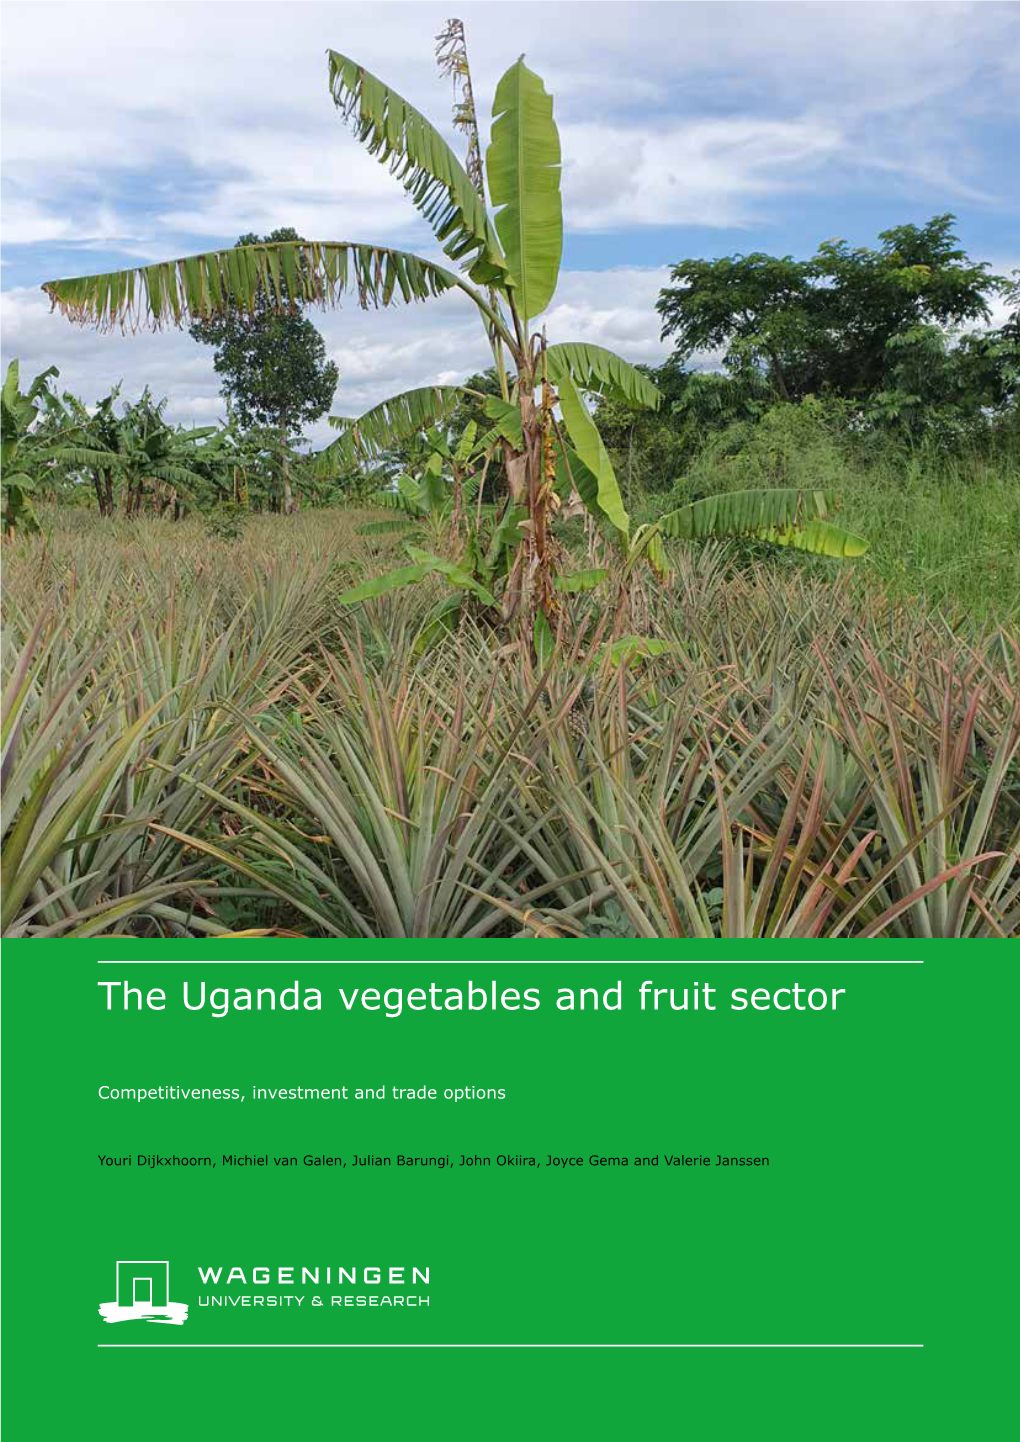 The Uganda Vegetables and Fruit Sector